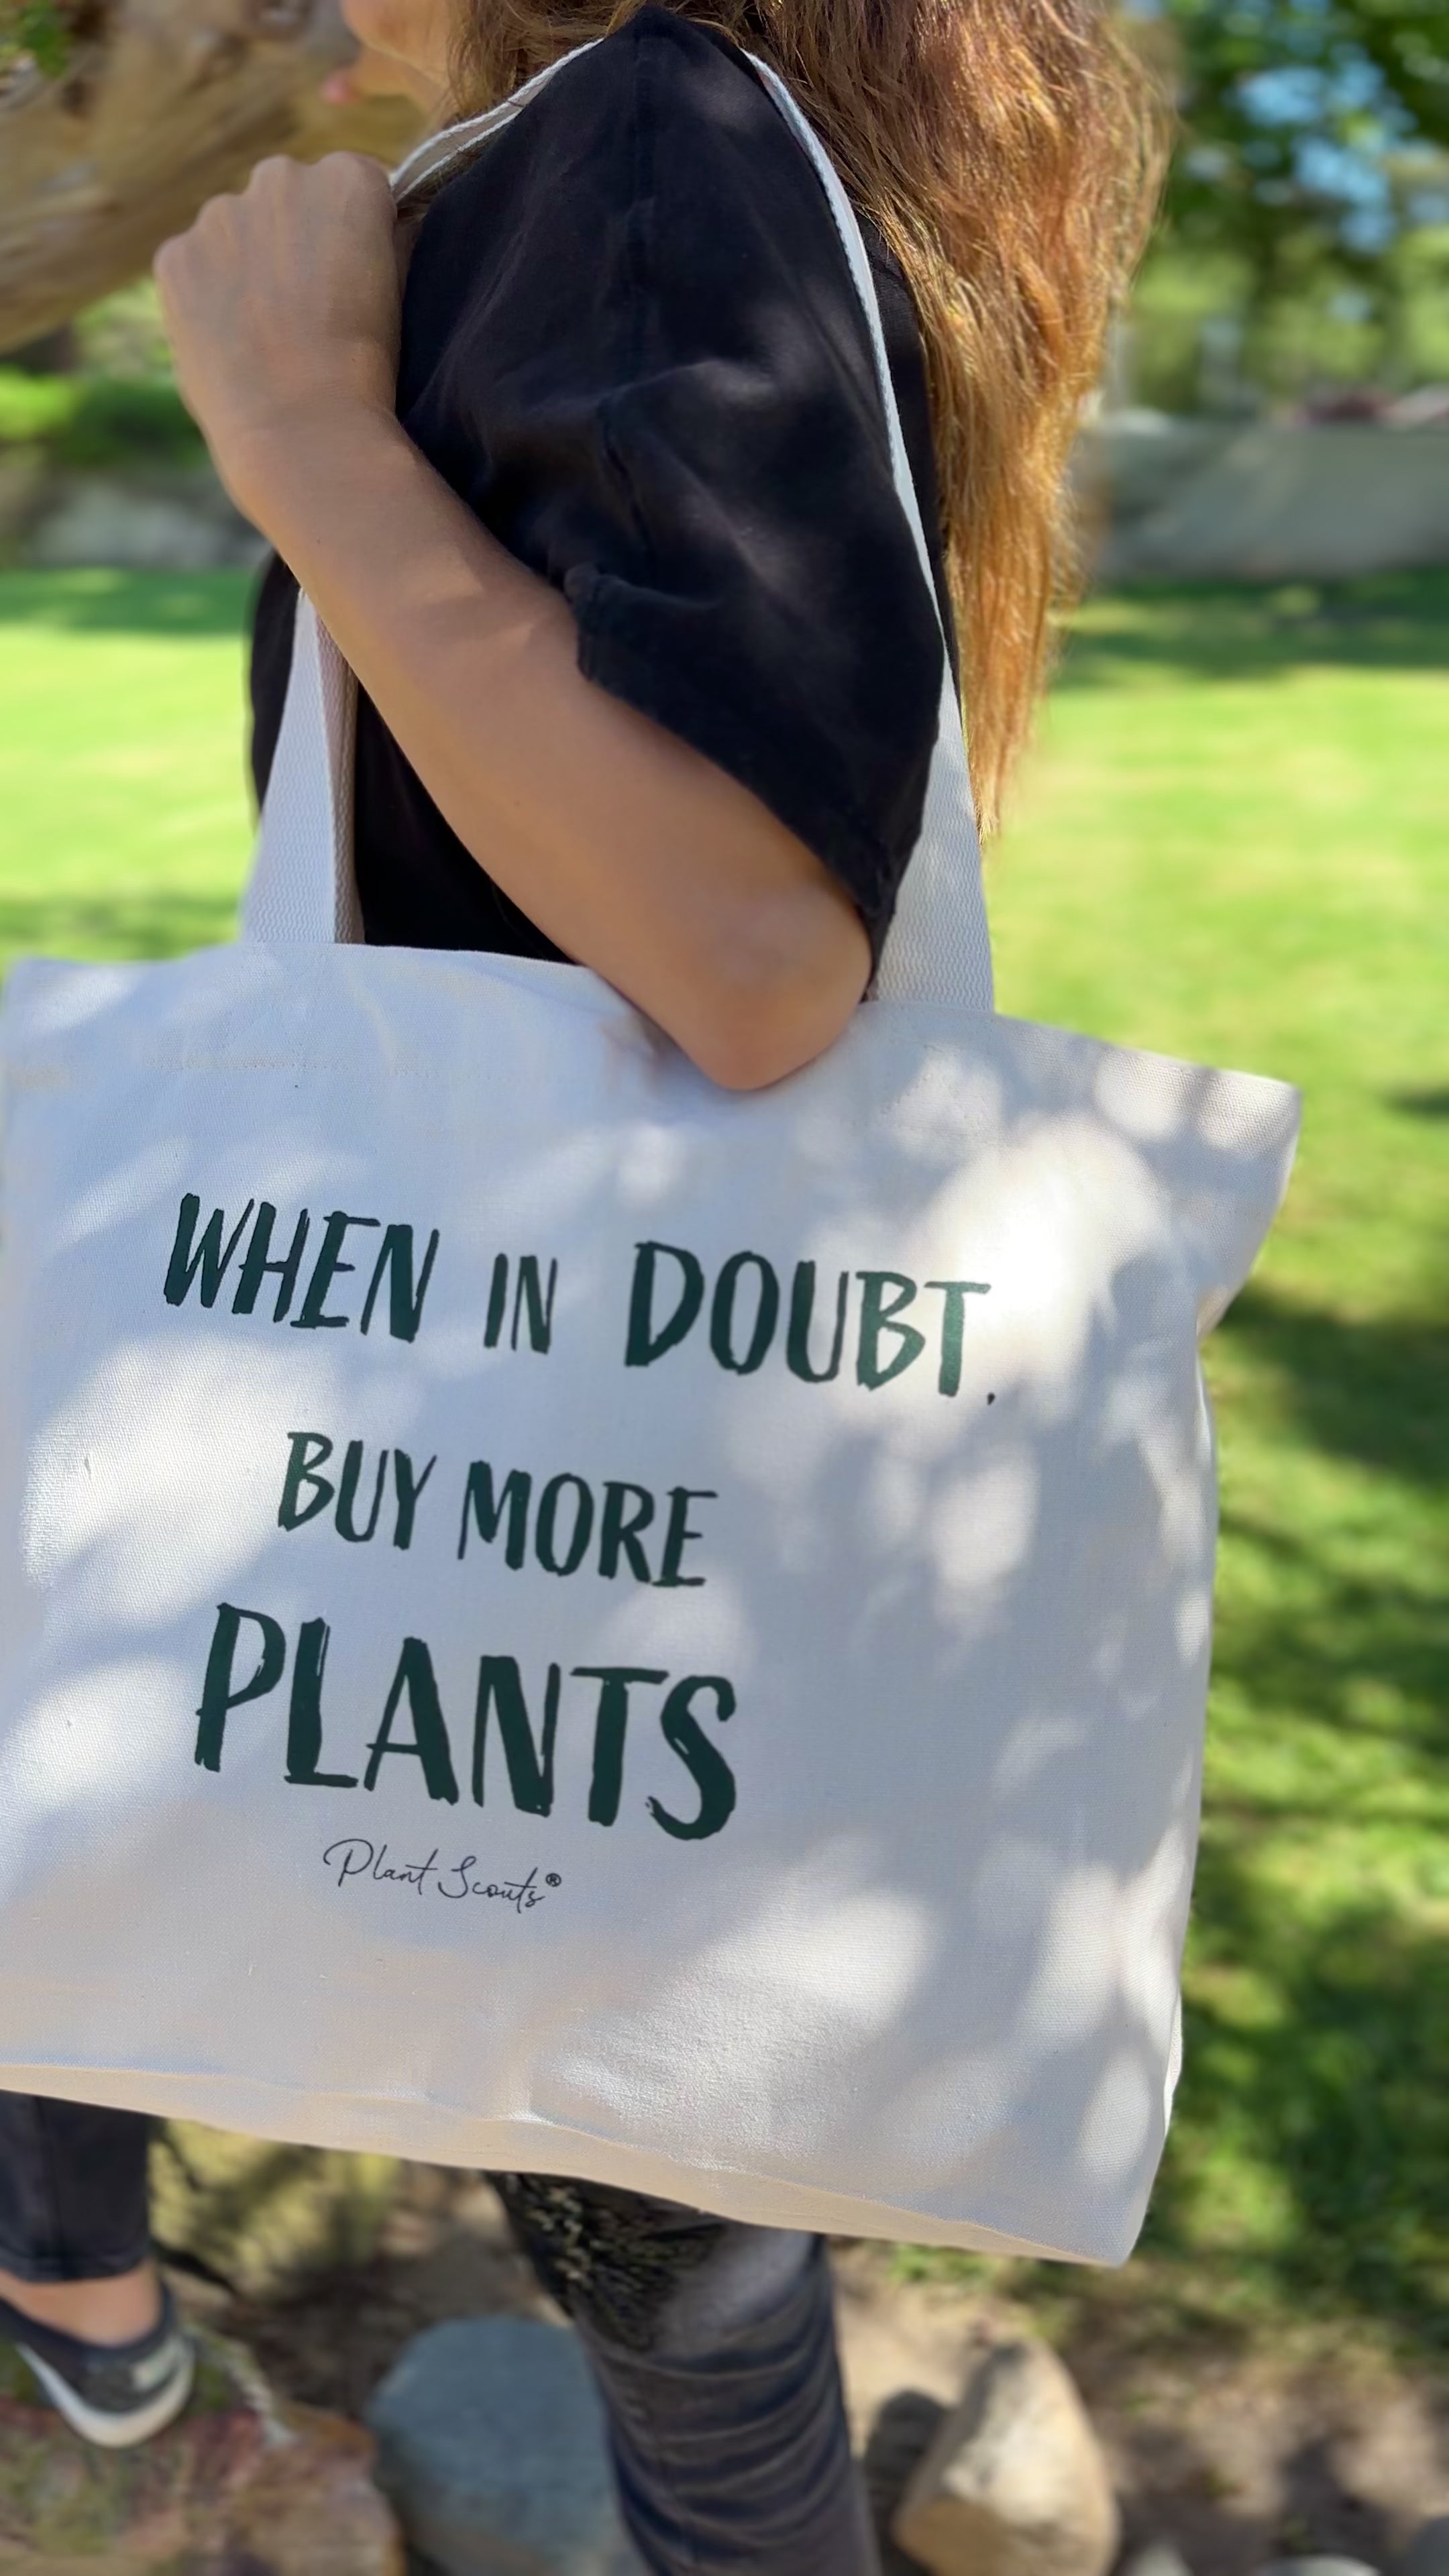 Plant Lover Tote Bag - "When in Doubt, Buy More Plants"